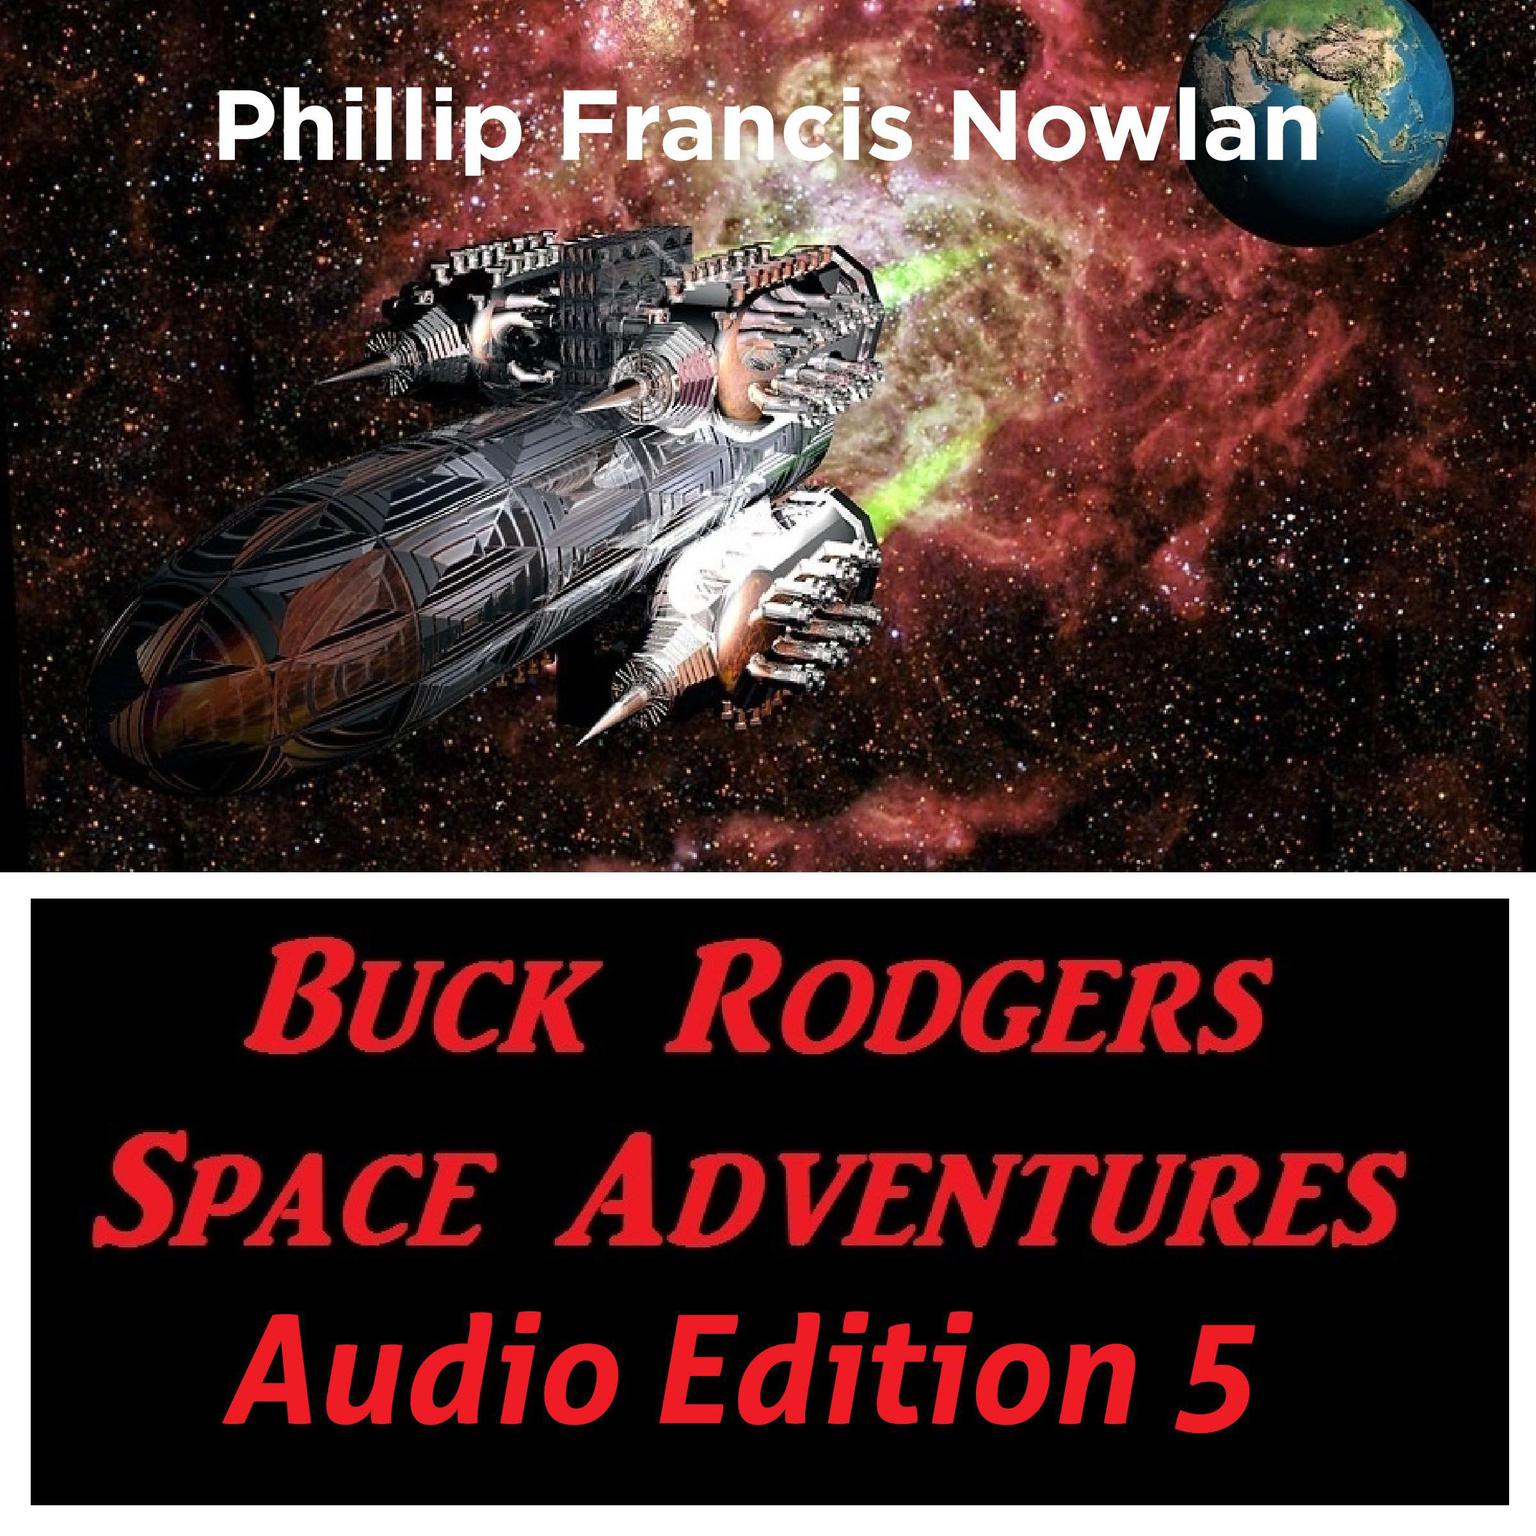 Buck Rodgers Space Adventures Audio Edition 05 Audiobook, by Phillip Francis Nowlan